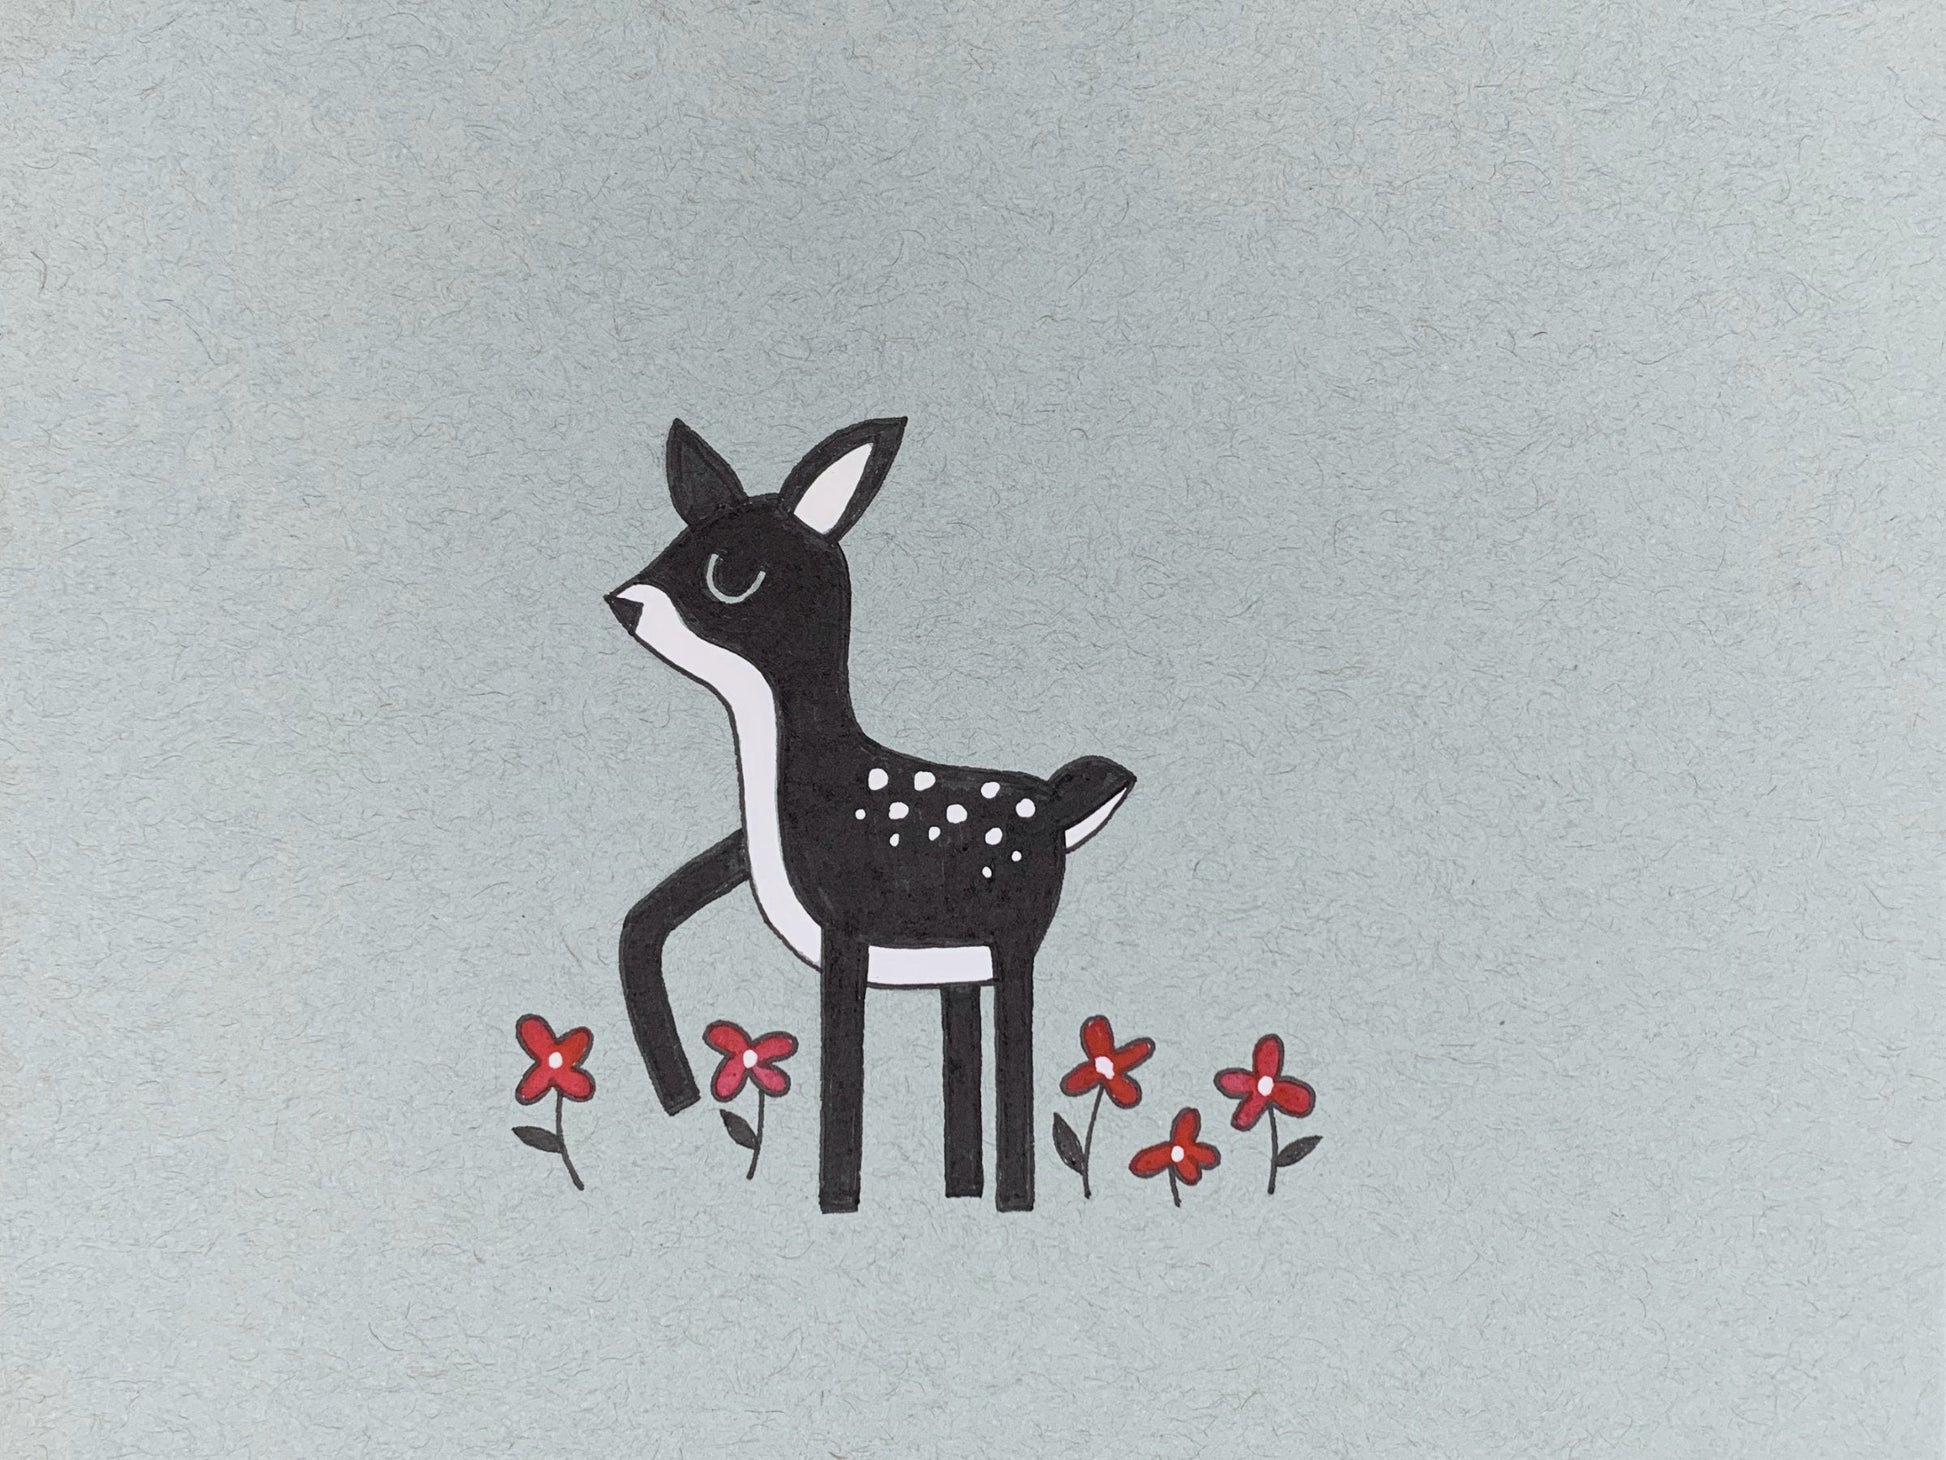 Original illustration of a little deer walking through a field of little flowers. Made using ink, watercolor, and gouache.